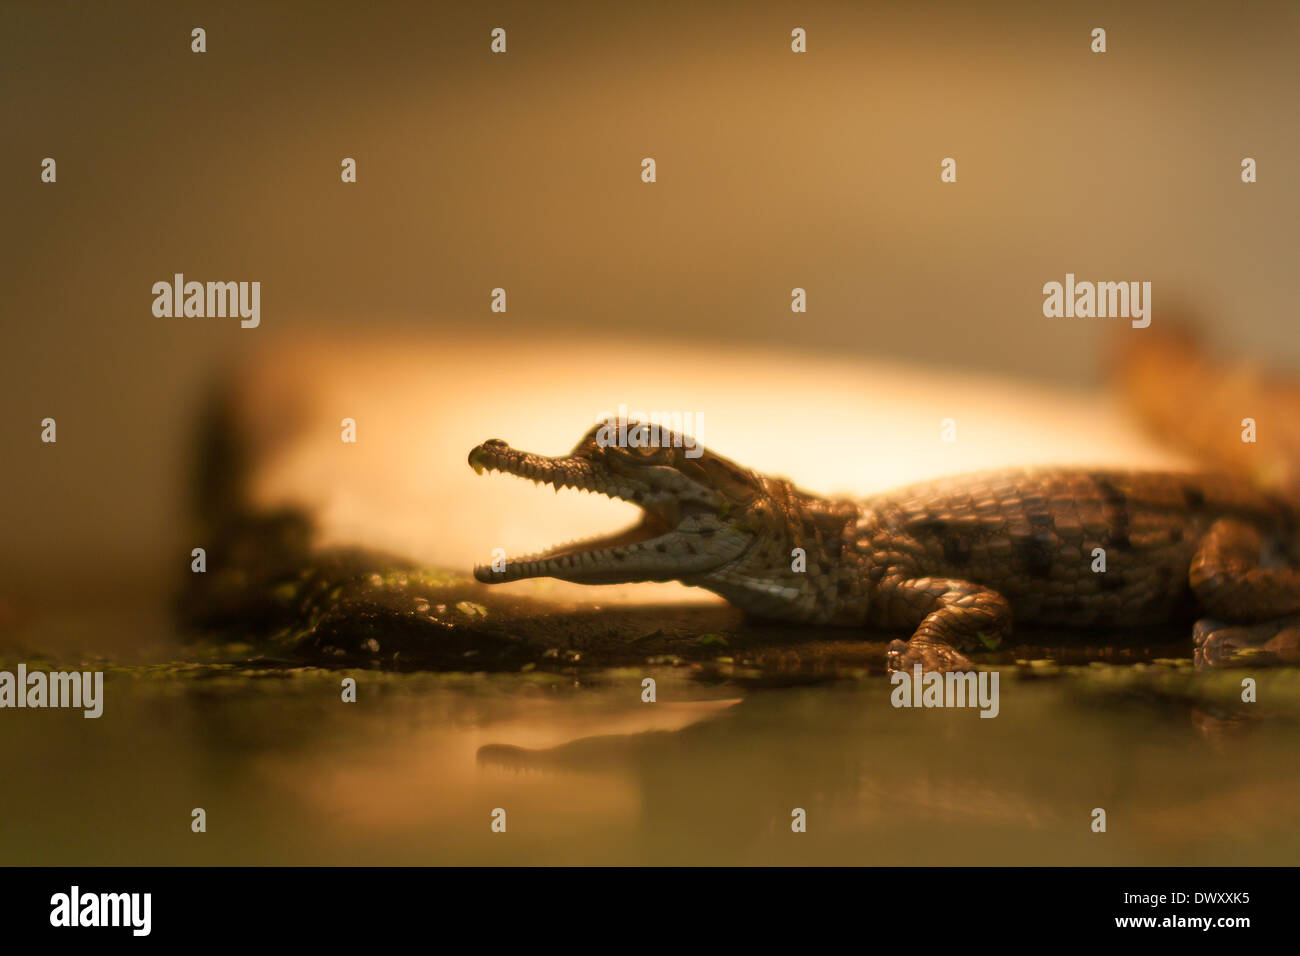 Caiman on swamp with open mouth Stock Photo